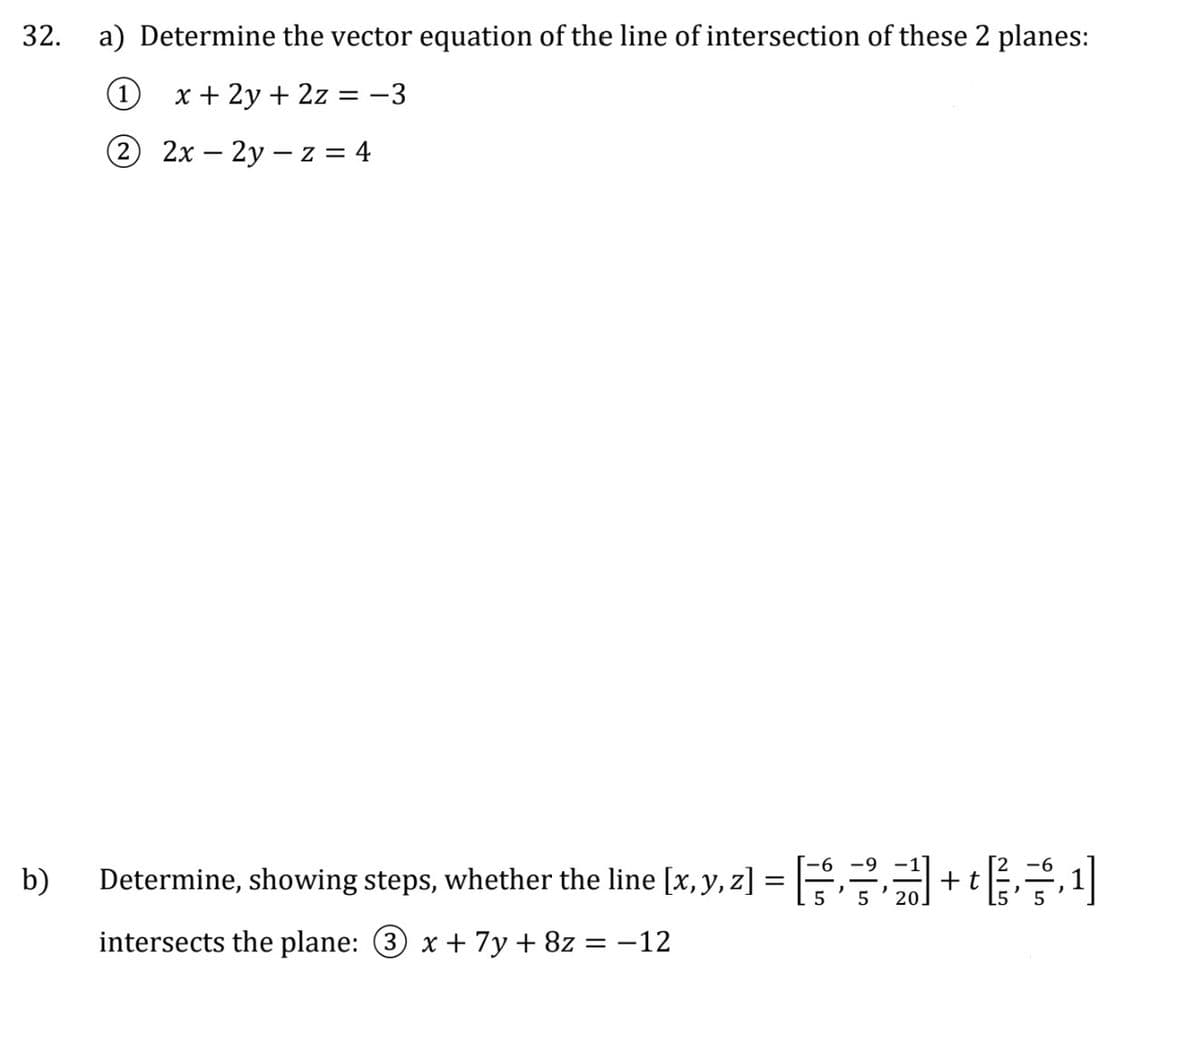 32. a) Determine the vector equation of the line of intersection of these 2 planes:
1 x + 2y + 2z = −3
2
2x - 2y -z = 4
b)
Determine, showing steps, whether the line [x, y, z
intersects the plane: 3 x + 7y + 8z = -12
=
5
5
+ t
,1]